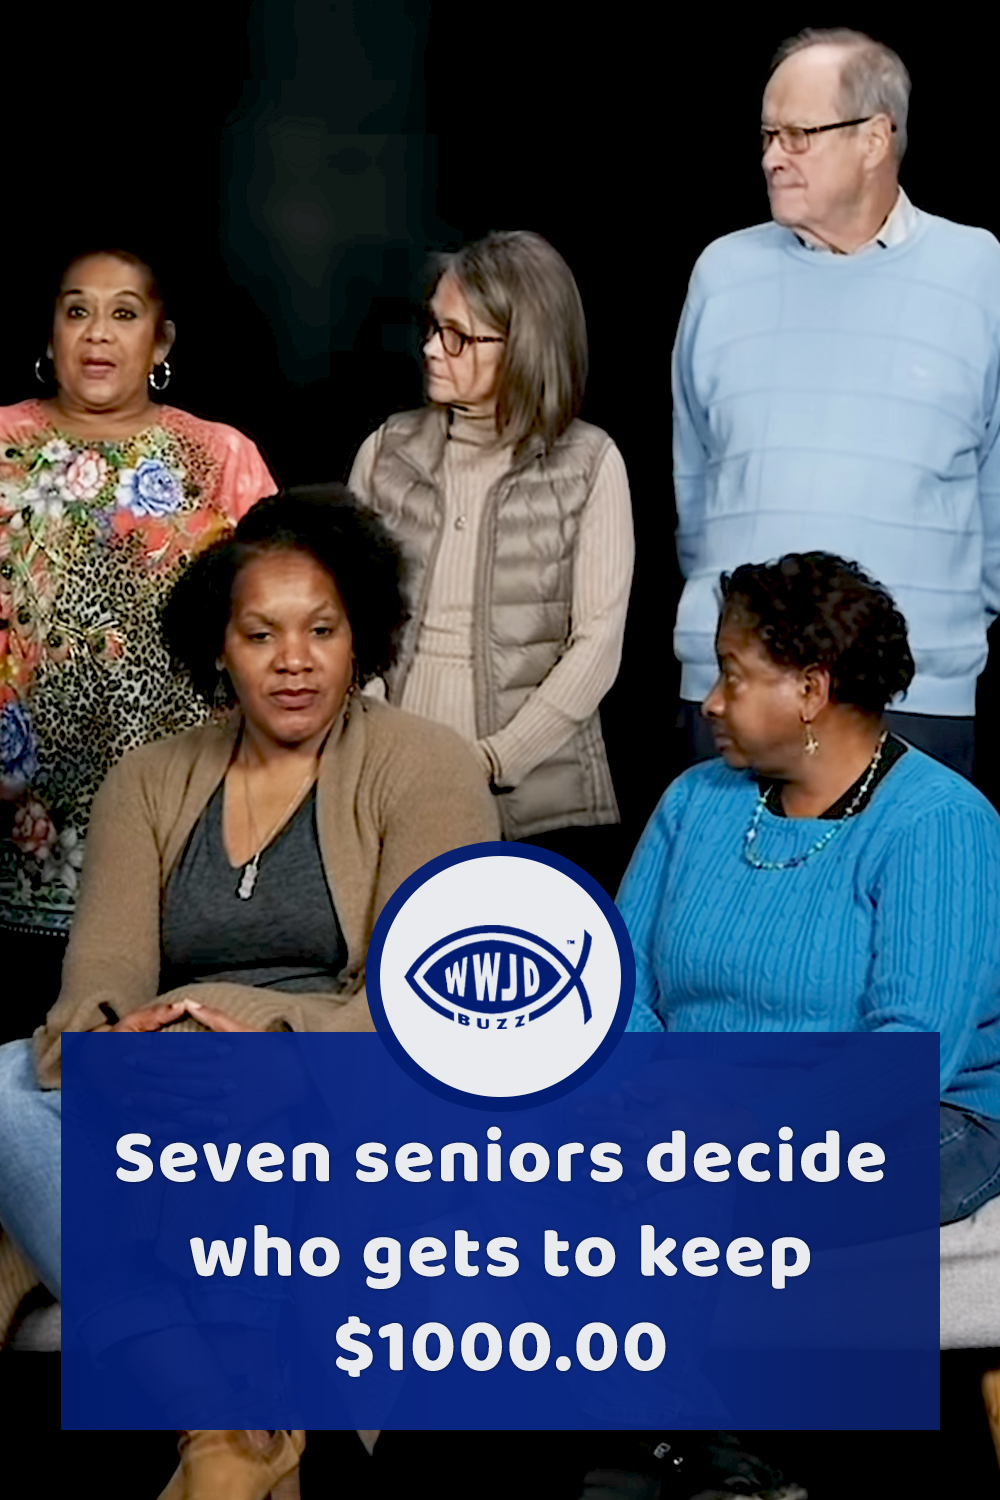 Seven seniors decide who gets to keep $1000.00